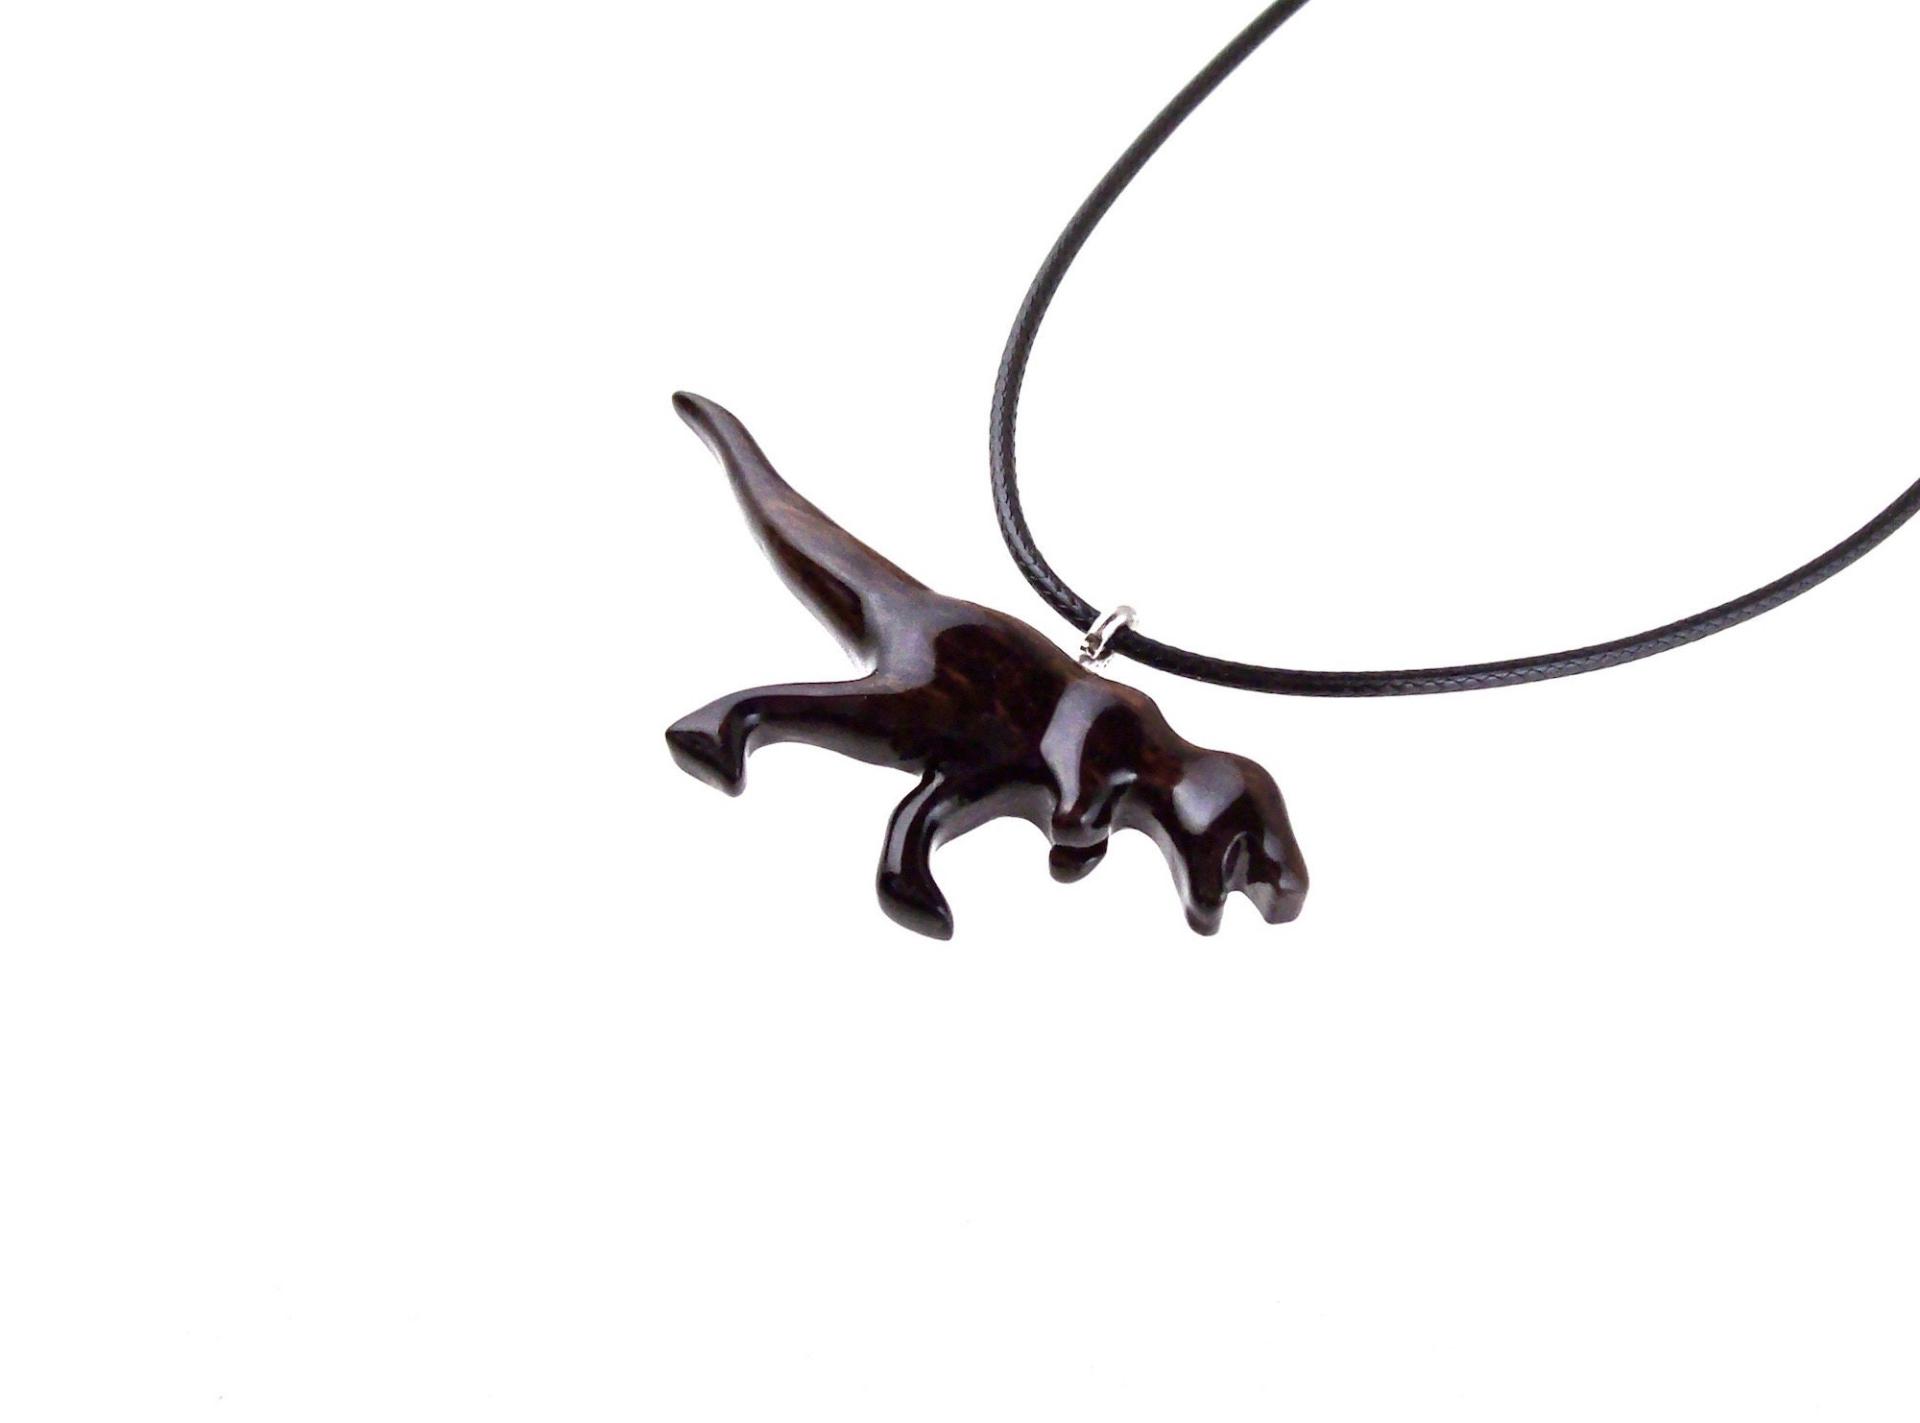 Dinosaur Necklace, Hand Carved Wooden T-Rex Pendant for Men or Women, Tyrannosaurus Necklace, Wood Jurassic Reptile Jewelry